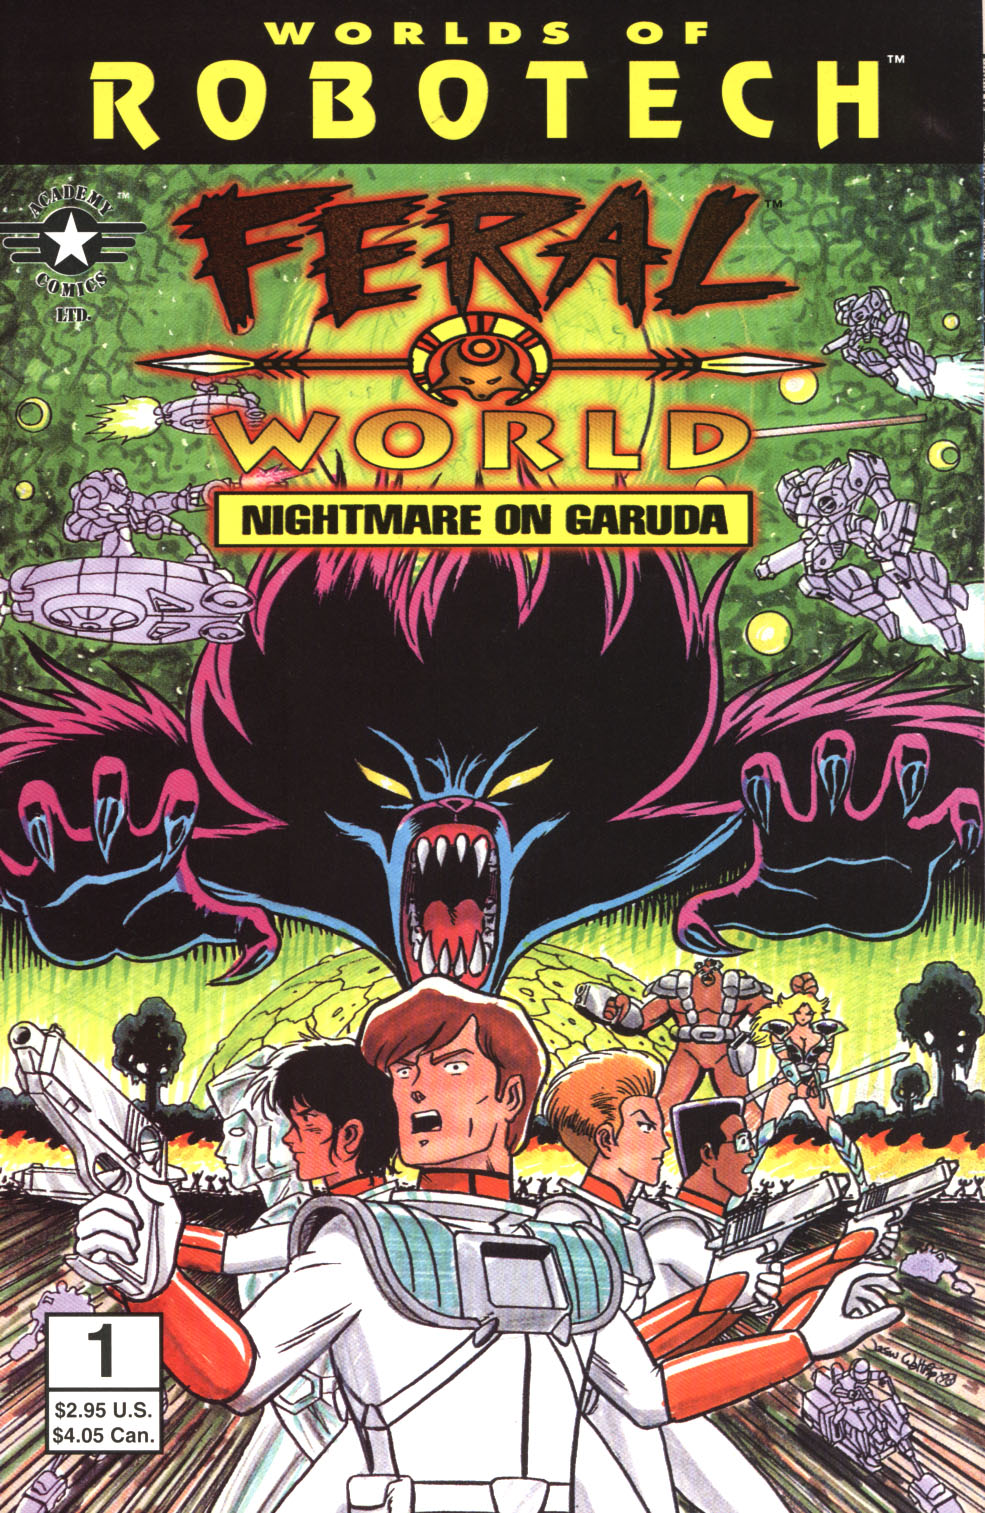 Worlds of Robotech: Feral World: Nightmare on Garuda Full Page 1